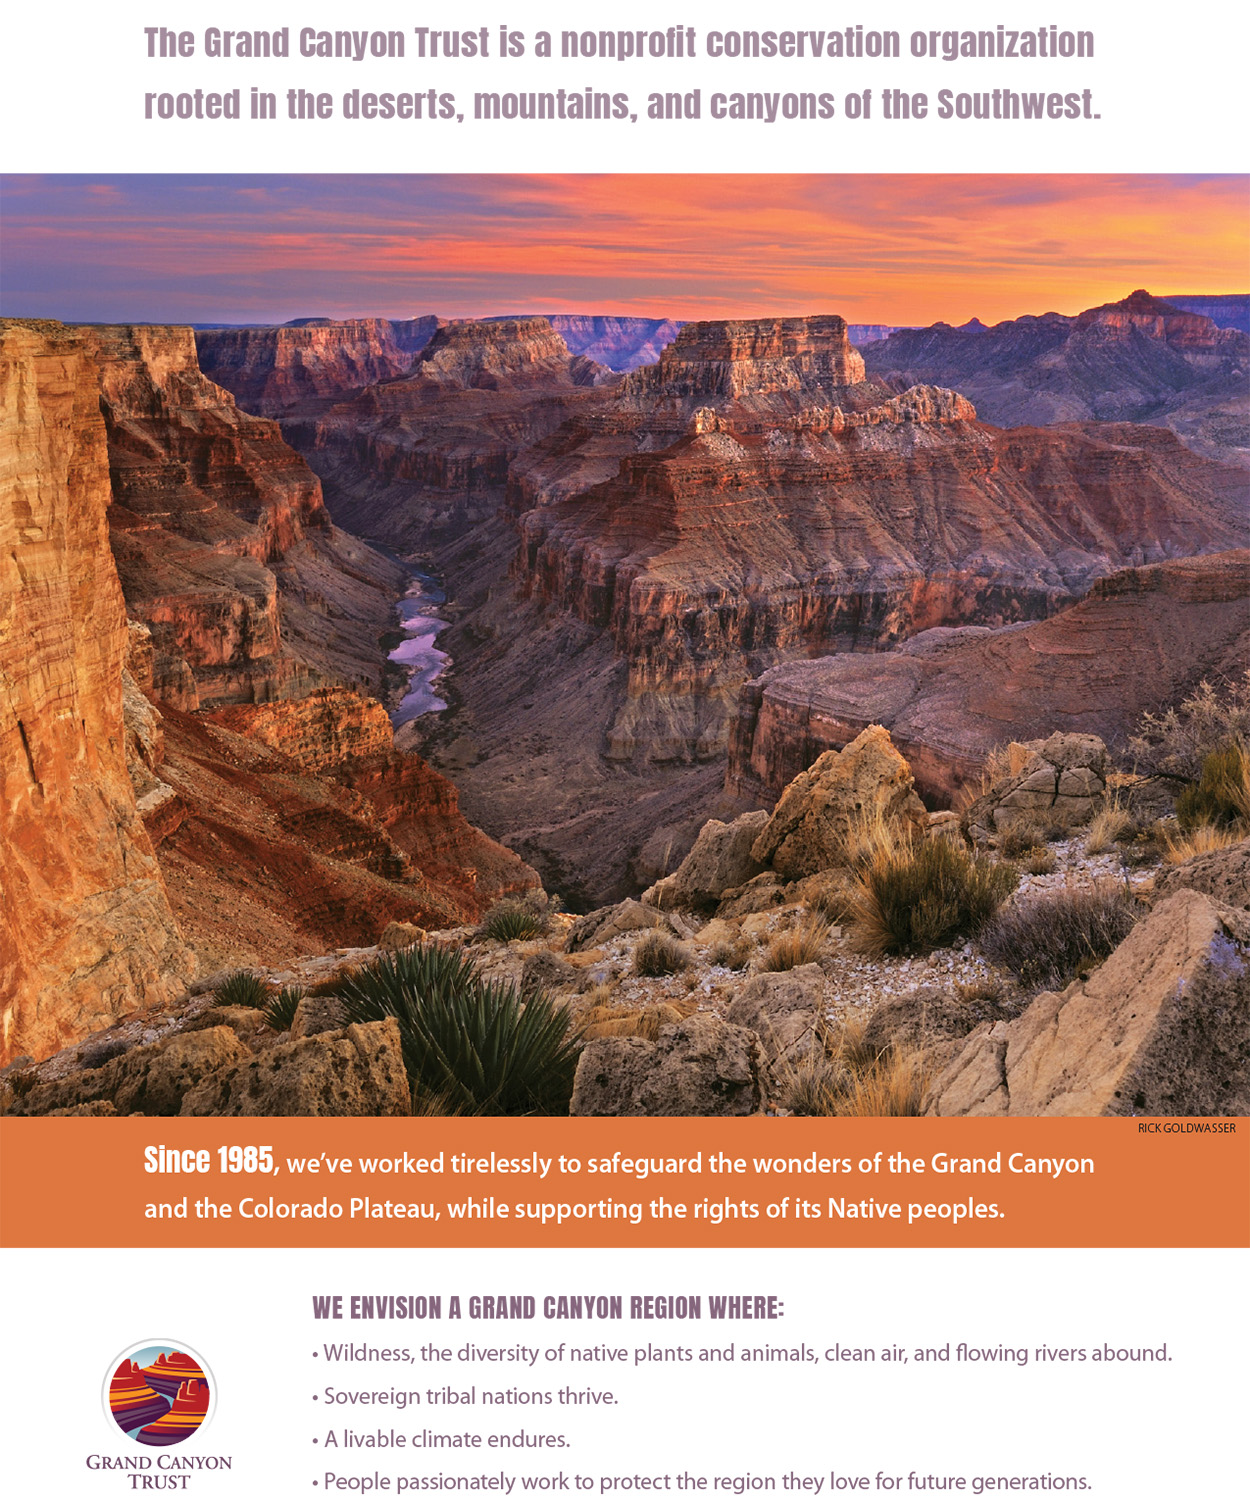 Learn about the Grand Canyon Trust